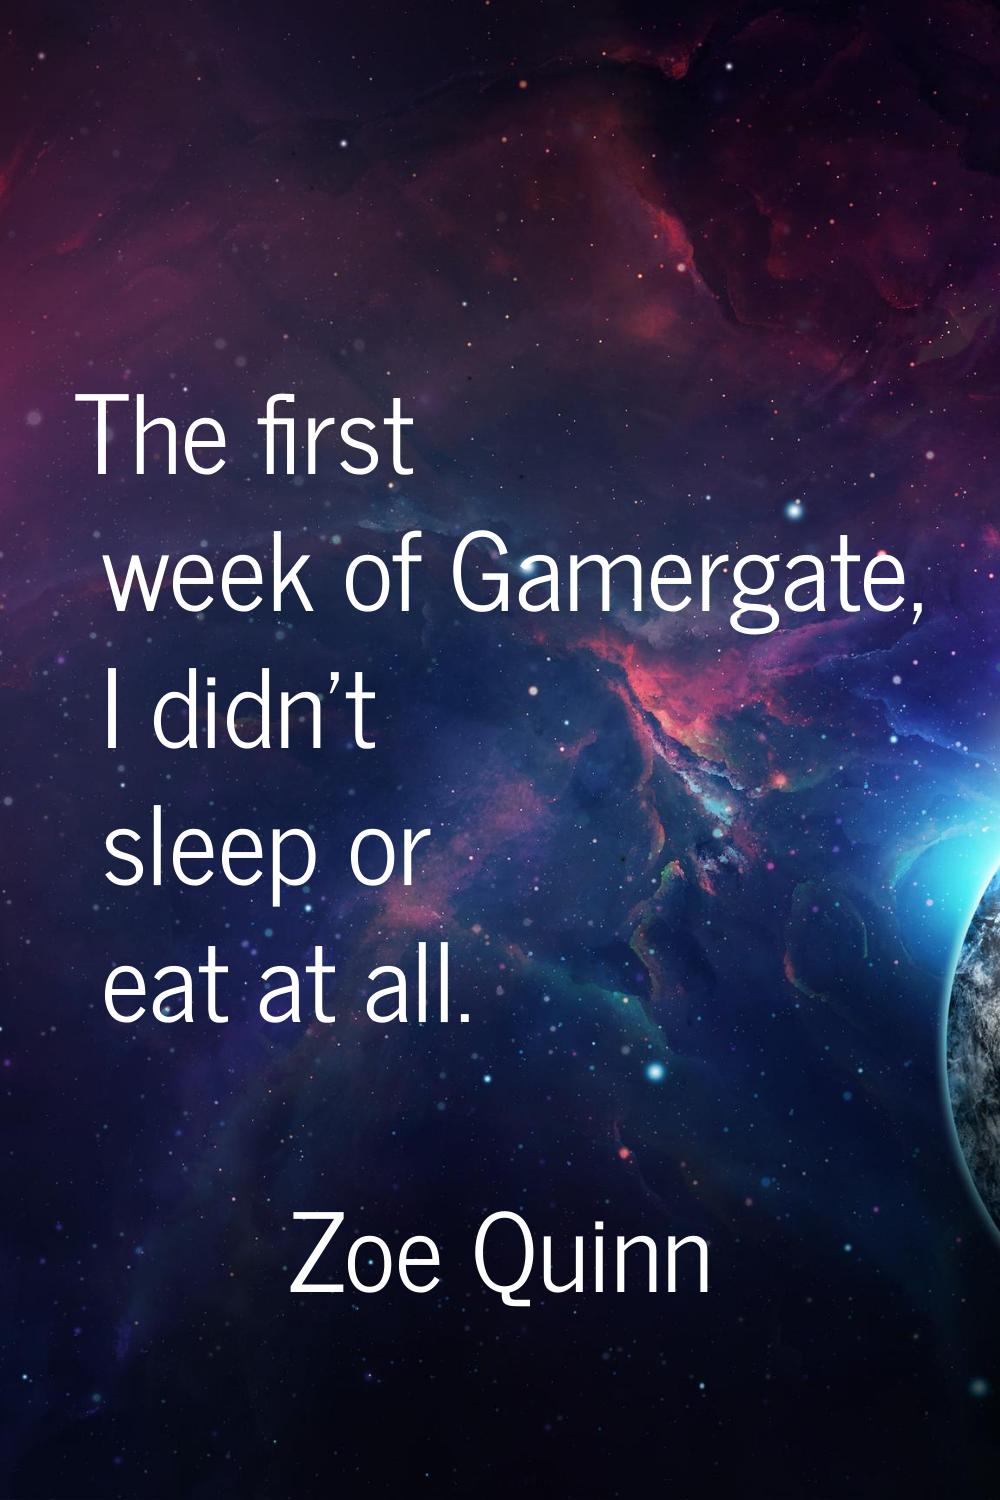 The first week of Gamergate, I didn't sleep or eat at all.